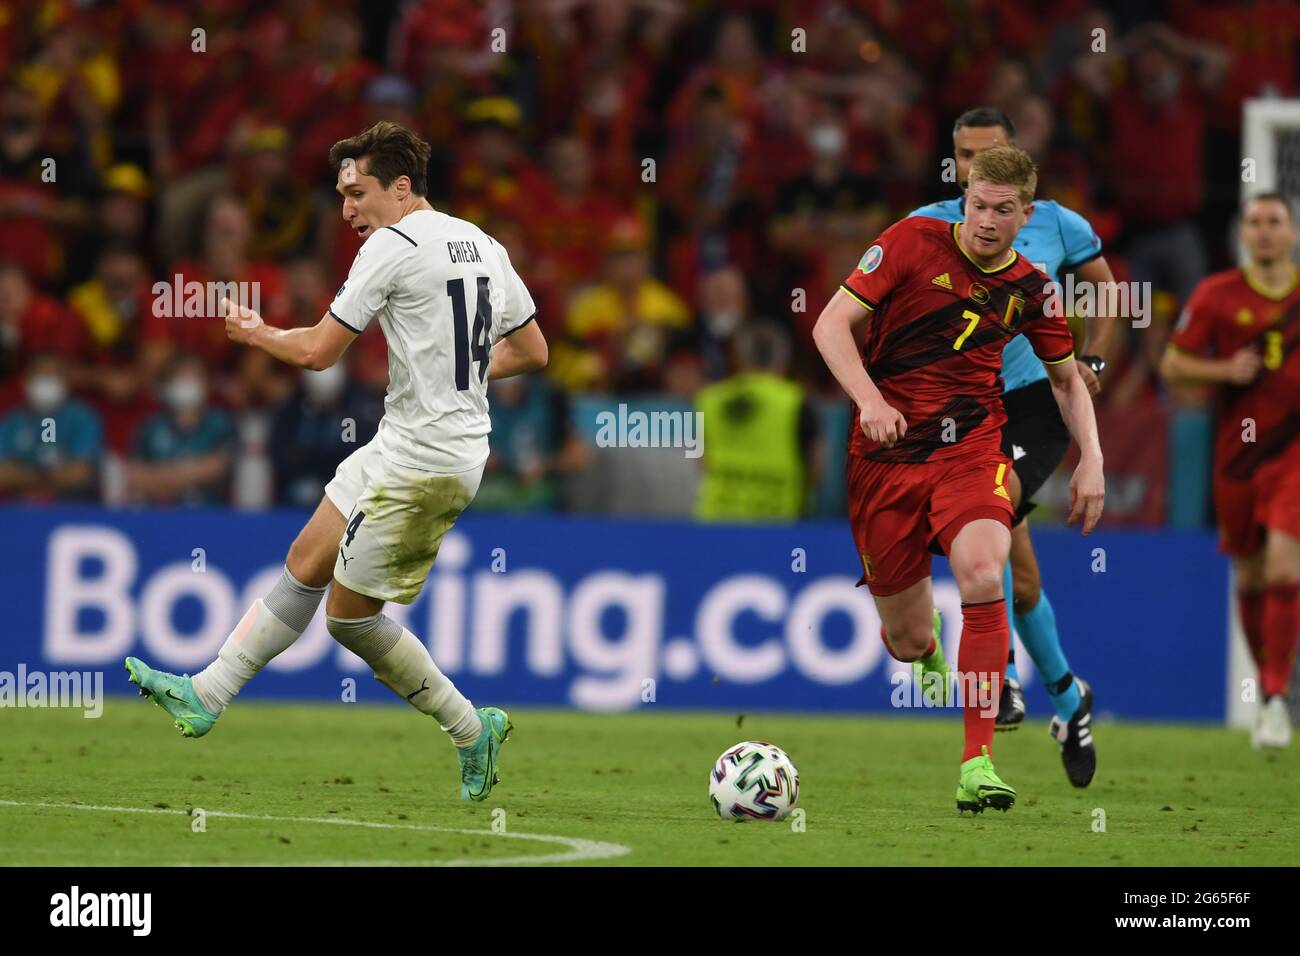 Munchen, Germany. 2nd July 2021. Federico Chiesa (Italy)Kevin De Bruyne (Belgium) during the Uefa 'European Championship 2020 Quarter-finals match between Belgium 1-2 Italy at Allianz Arena on July 02, 2021 in Munchen, Germany. Credit: Maurizio Borsari/AFLO/Alamy Live News Stock Photo